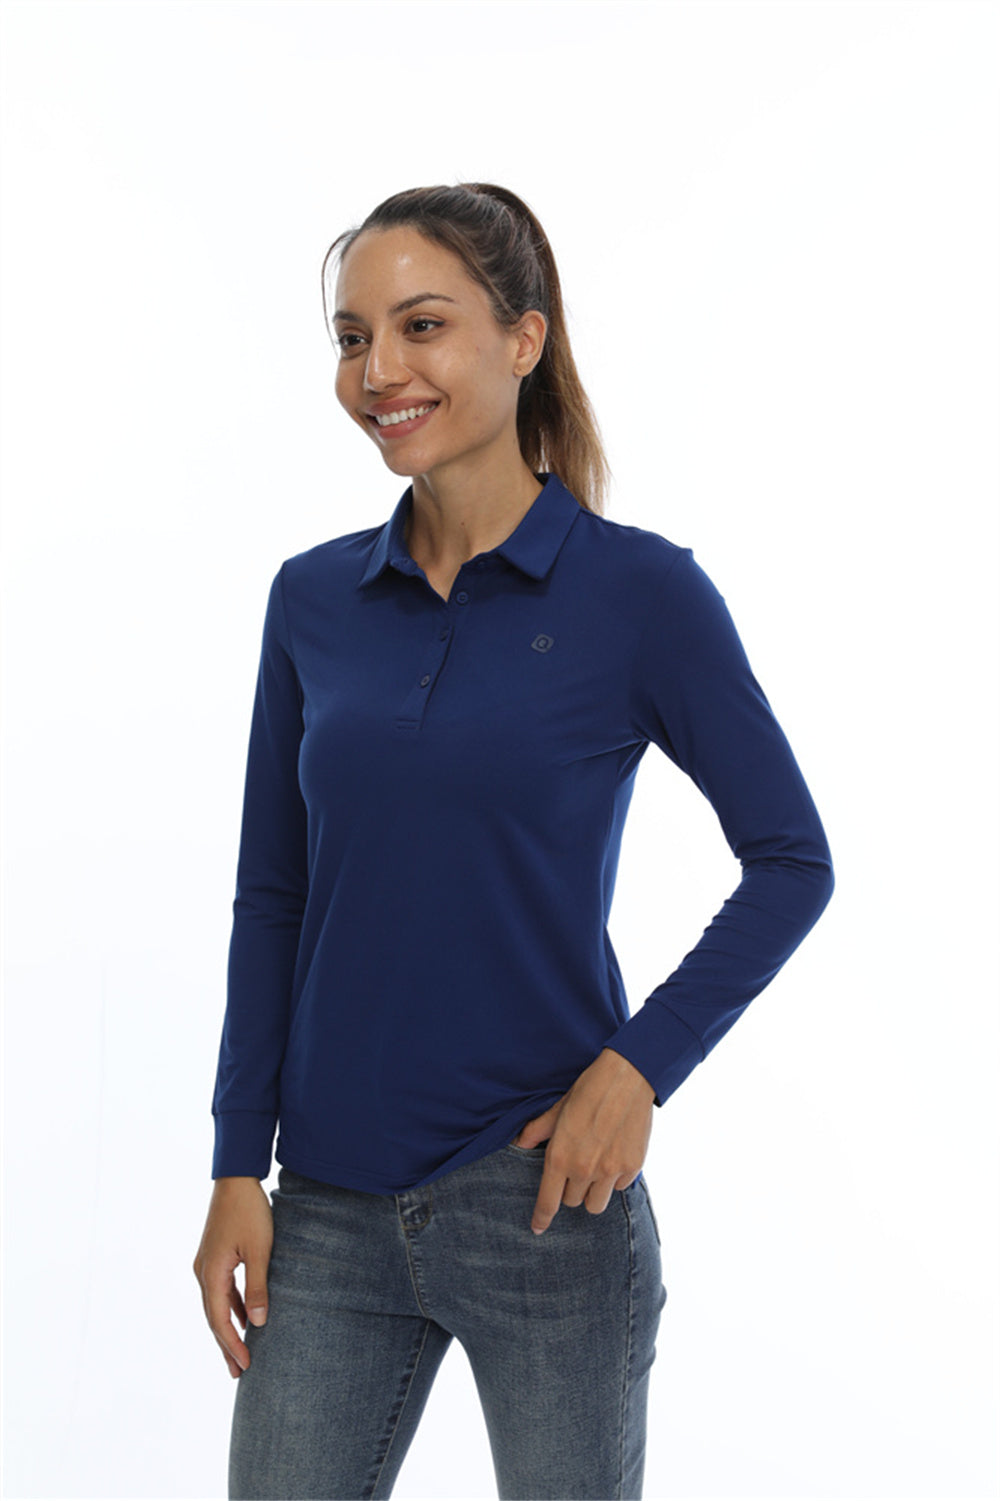 Quarter button collar long sleeve polo shirt. The shirts provides excellent UV protection from the sun.  